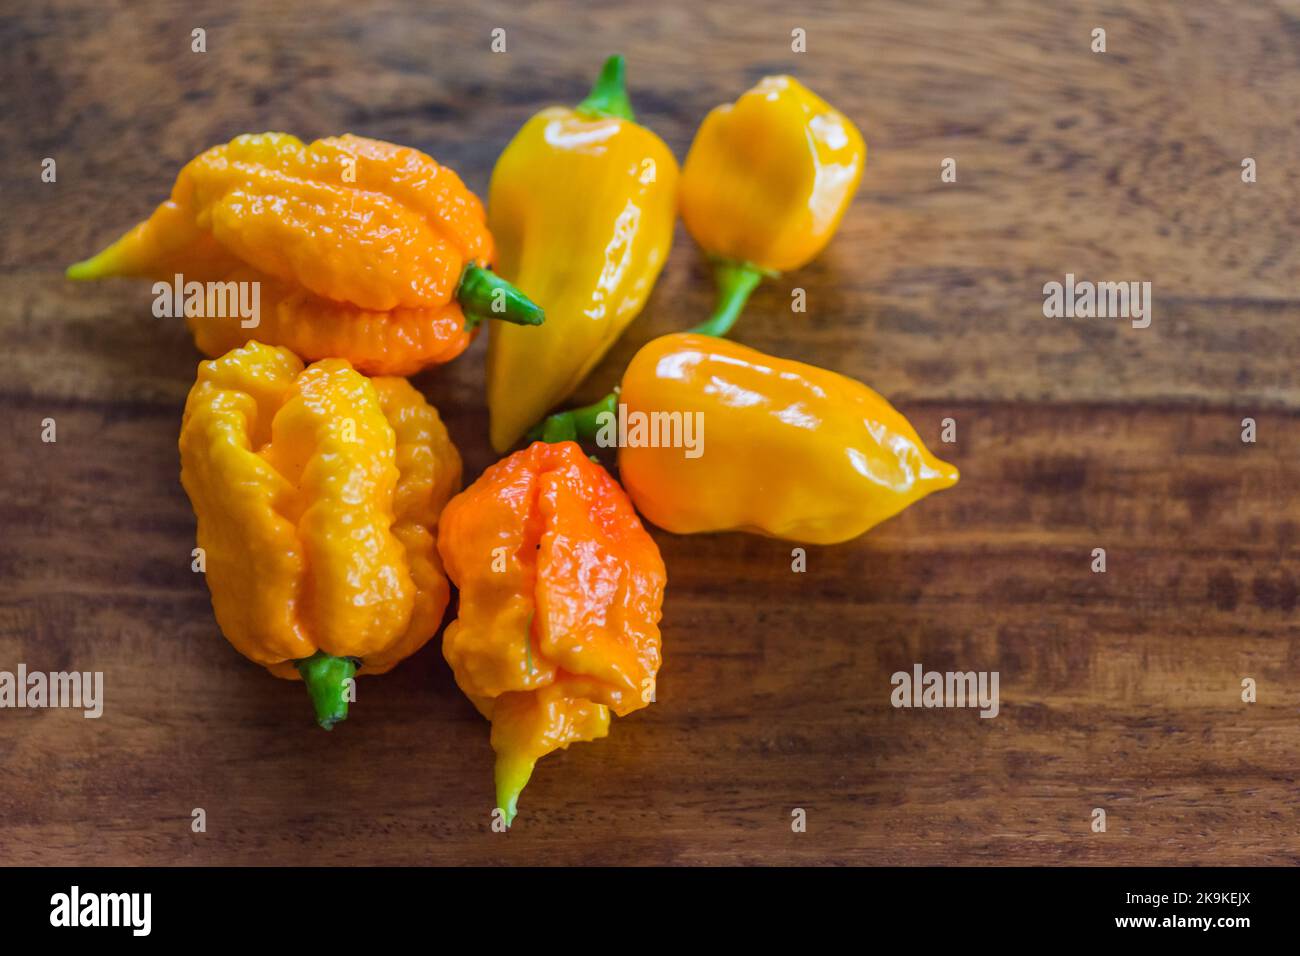 many yellow very sharp habaneros on a wooden table detail view Stock Photo